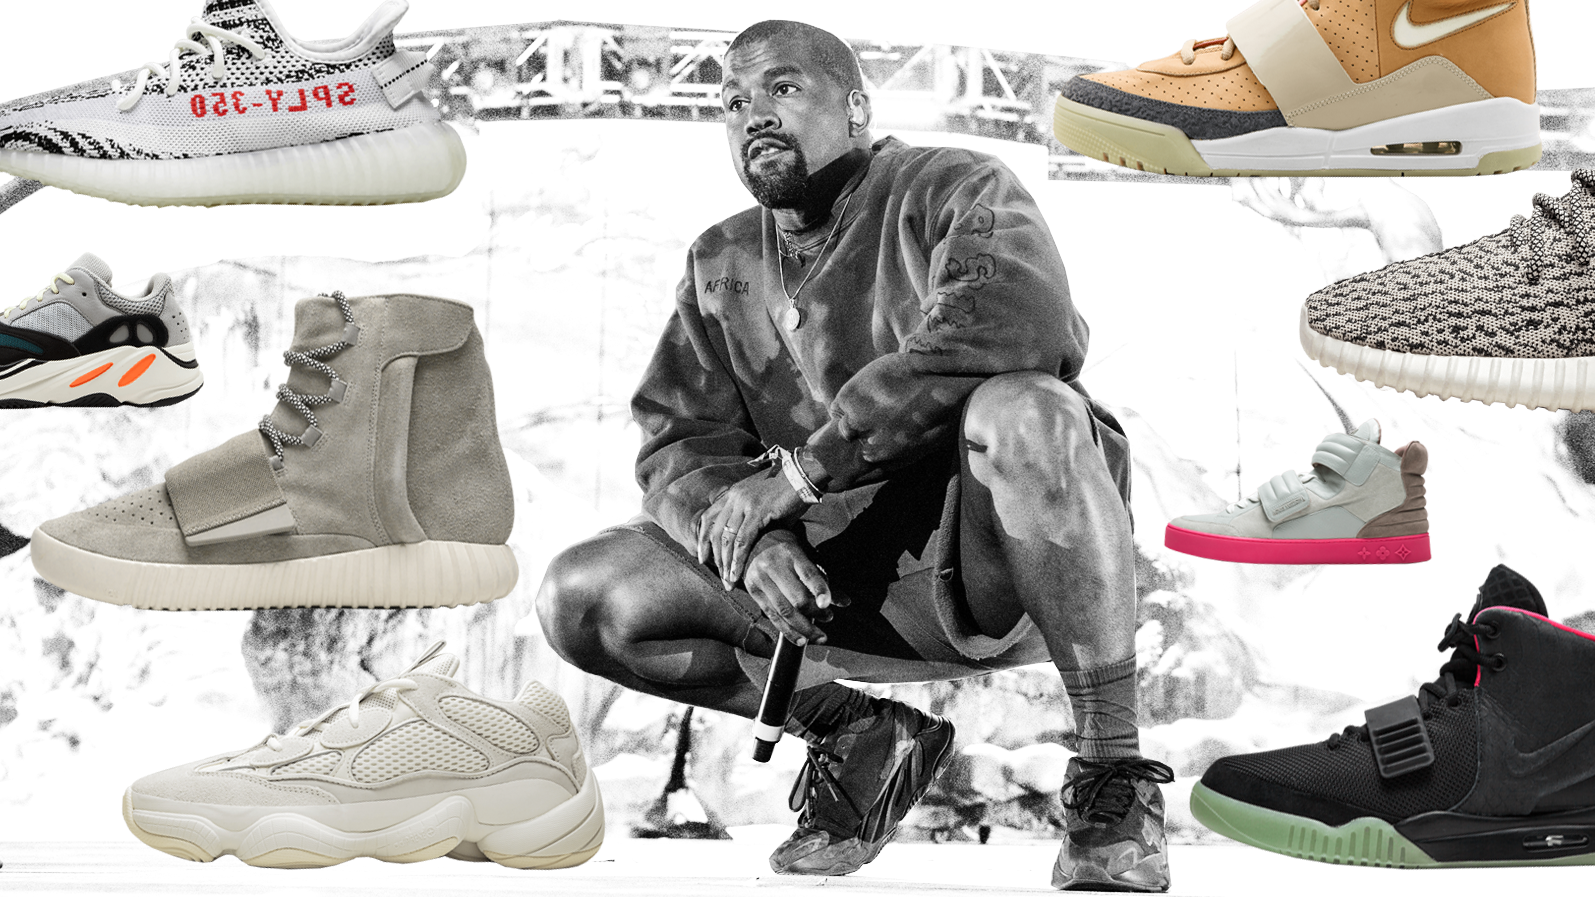 Kanye West X Louis Vuitton - Sneaker Collection, Available Starting Today